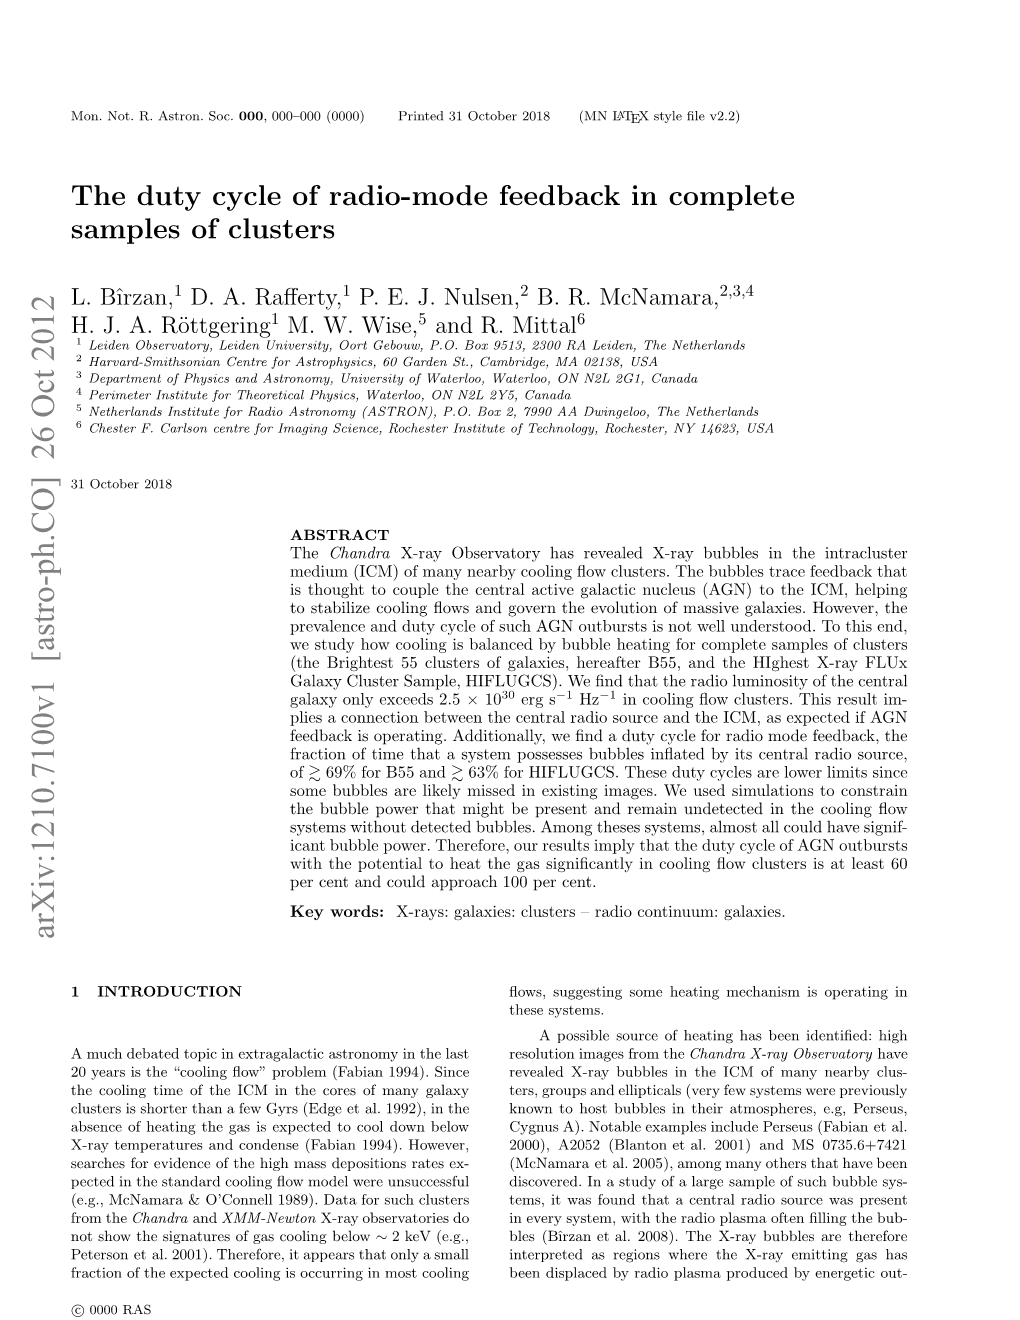 The Duty Cycle of Radio-Mode Feedback in Complete Samples Of